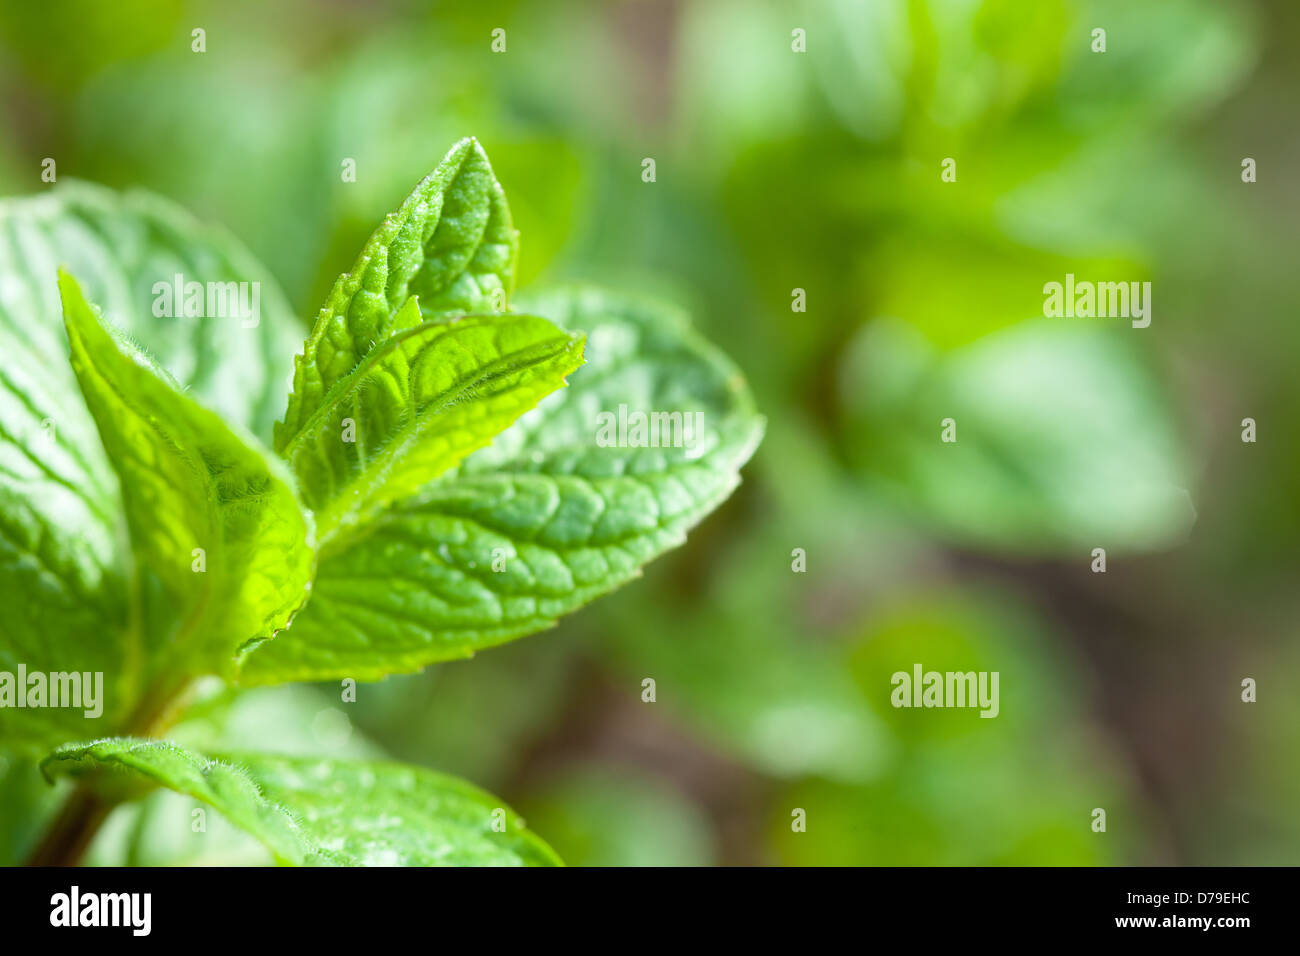 vegetated new peppermint with fresh green leaves Stock Photo